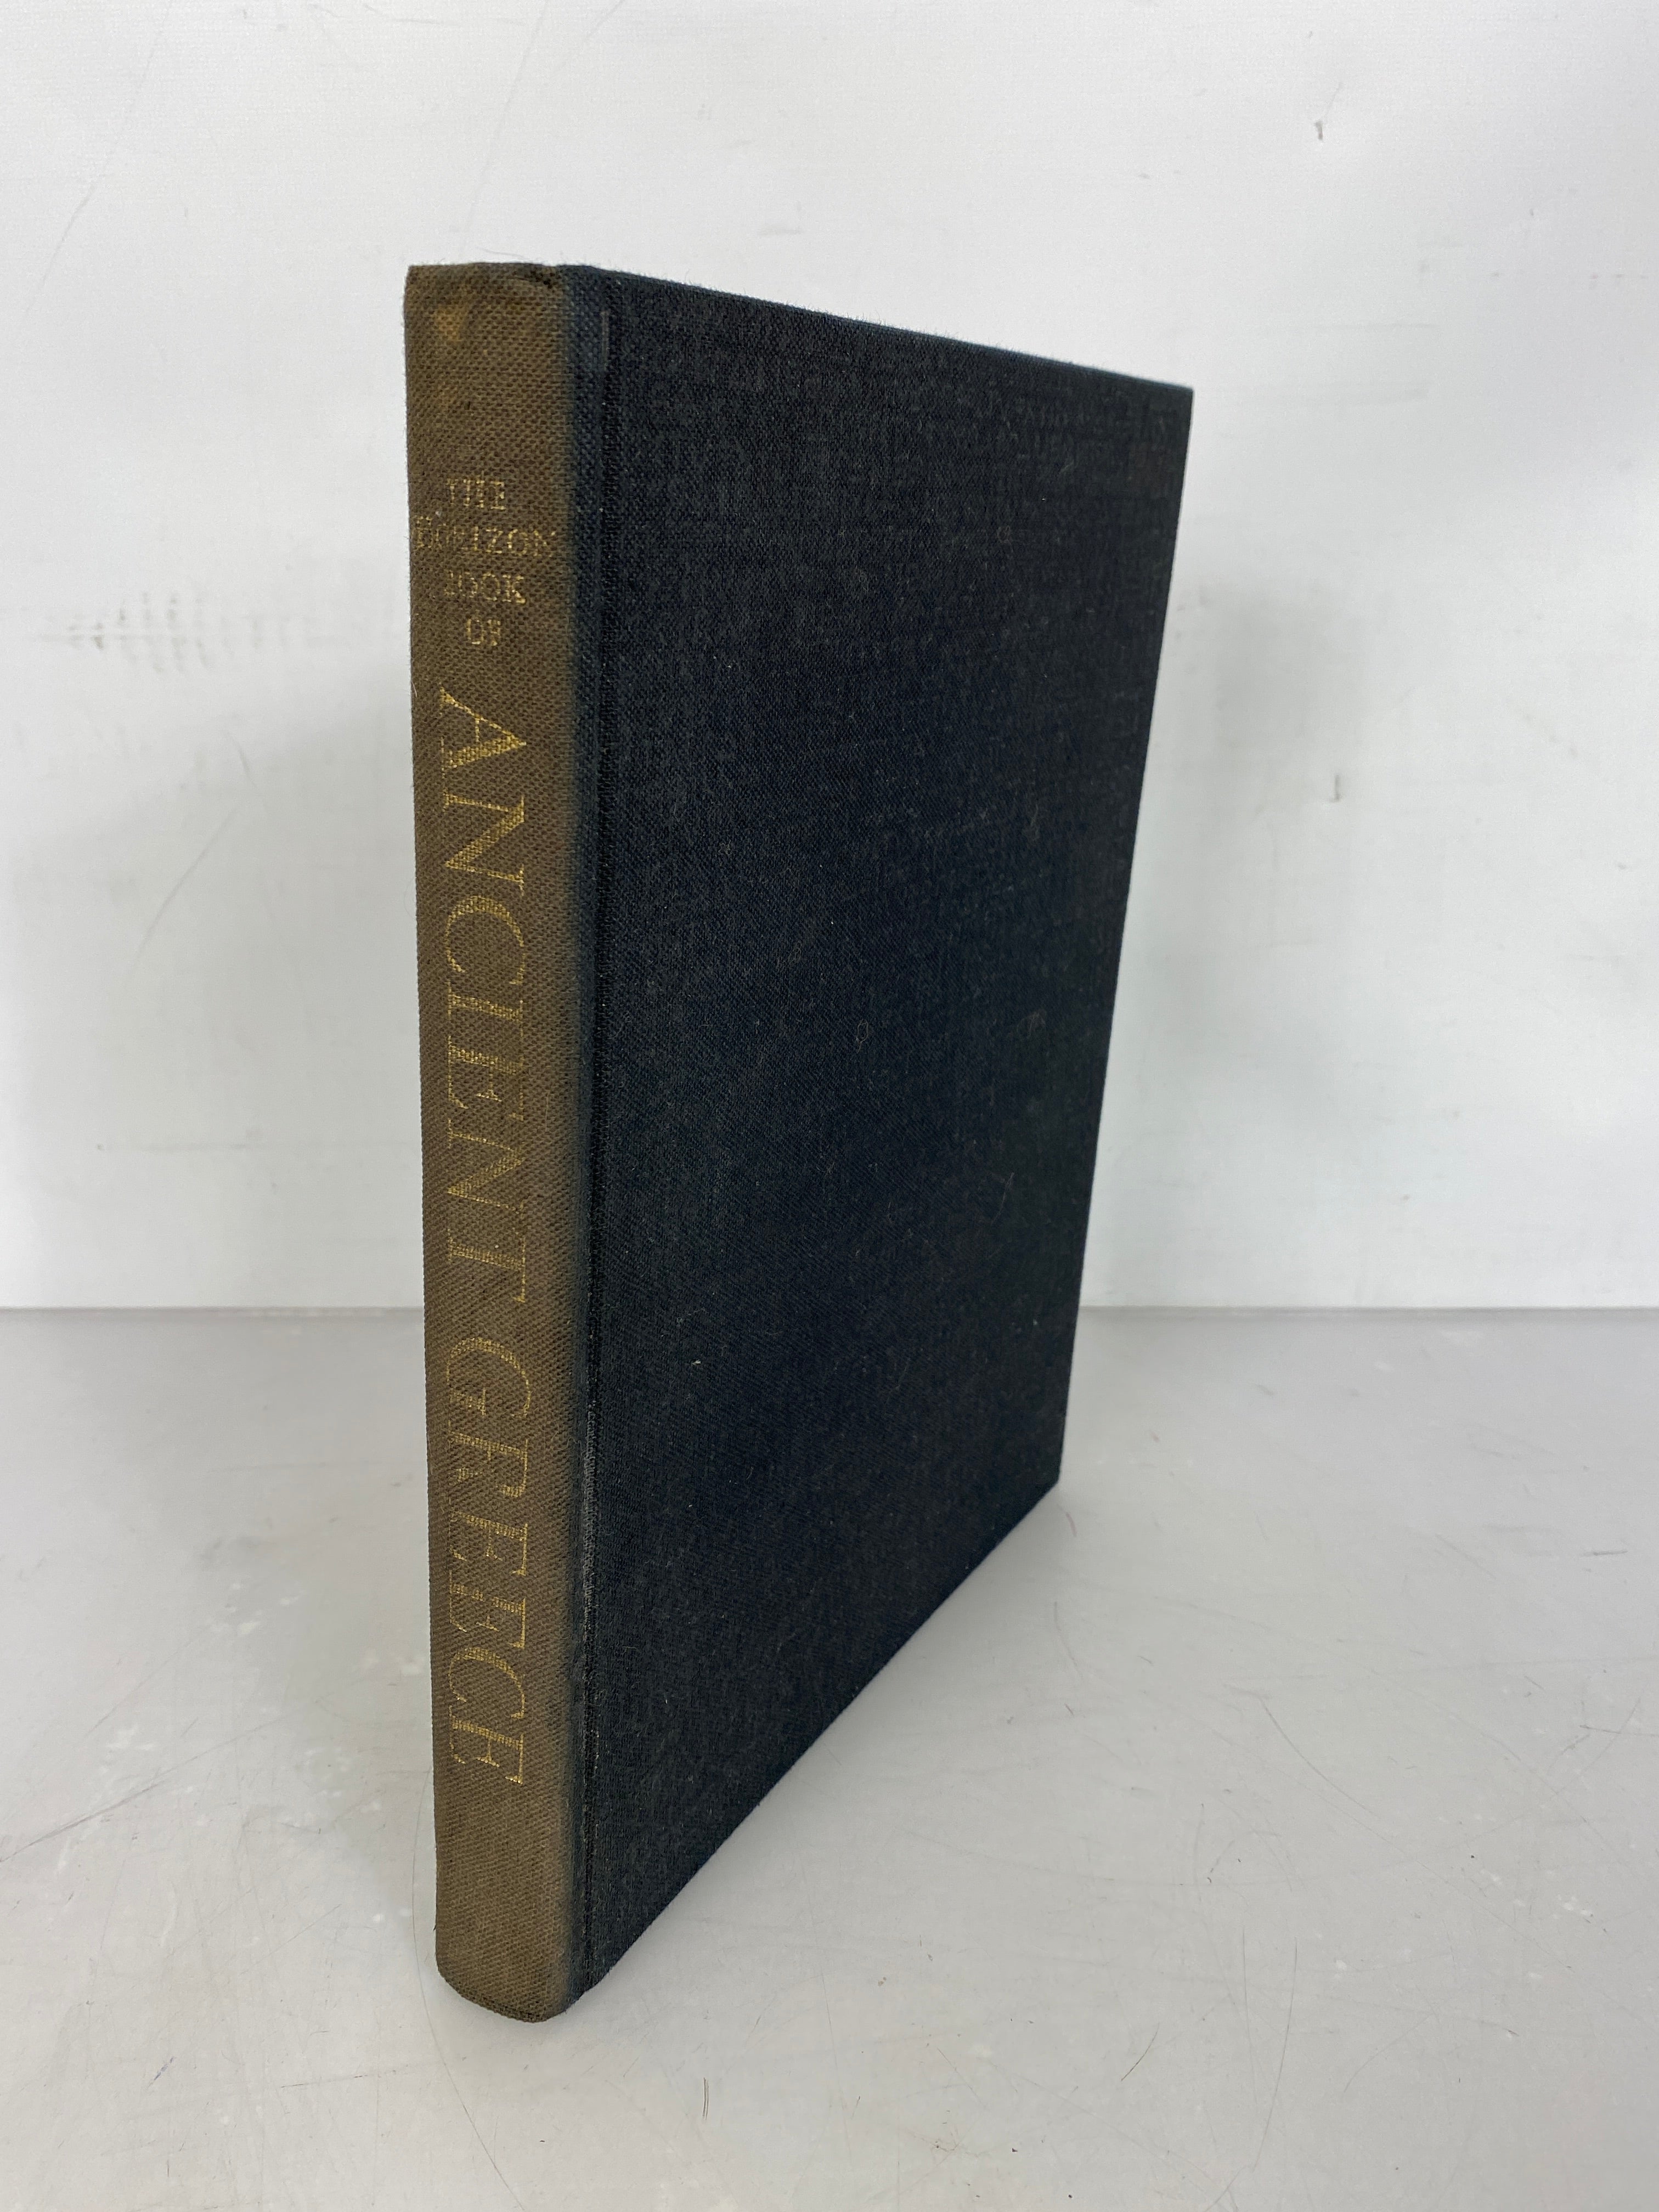 The Horizon Book of Ancient Greece by William Harlan Hale with Slipcase 1965 HC